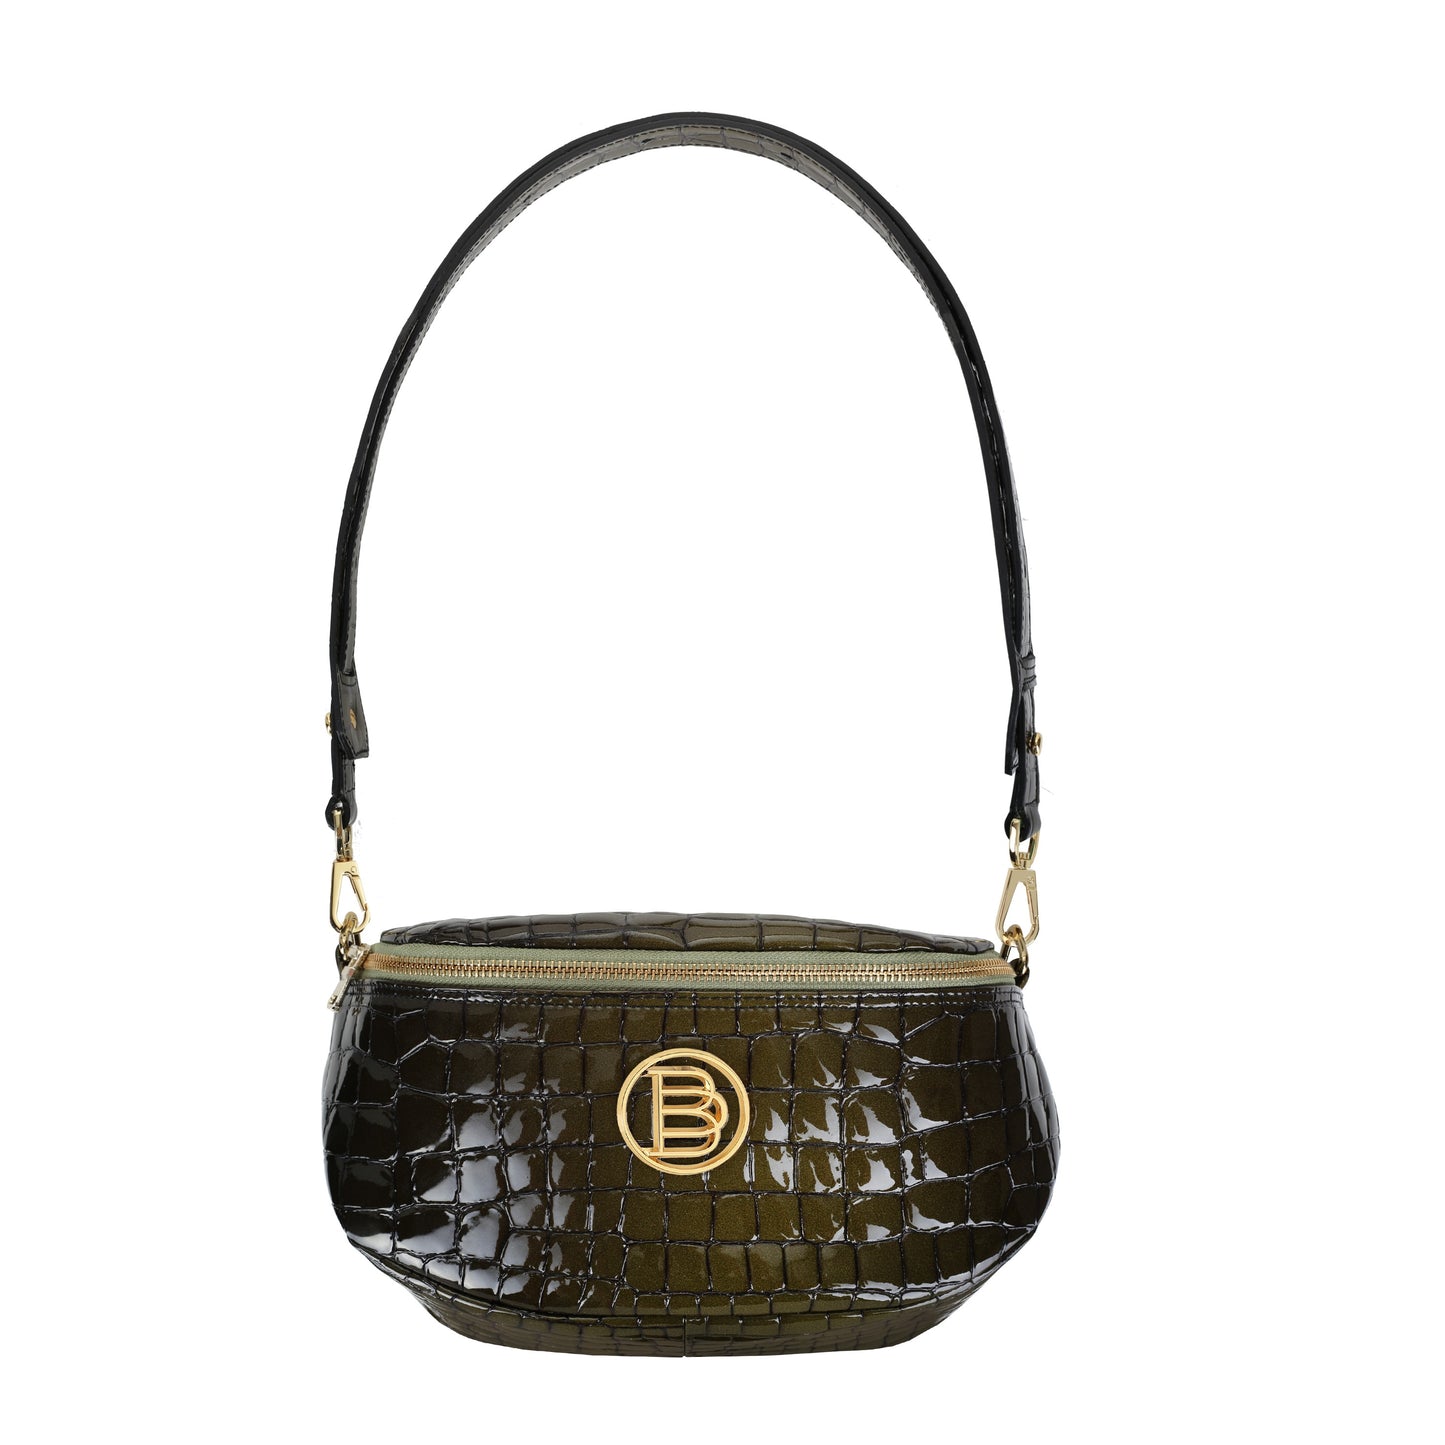 TO GO MOSAIC SHADOW OLIVE women's leather bag